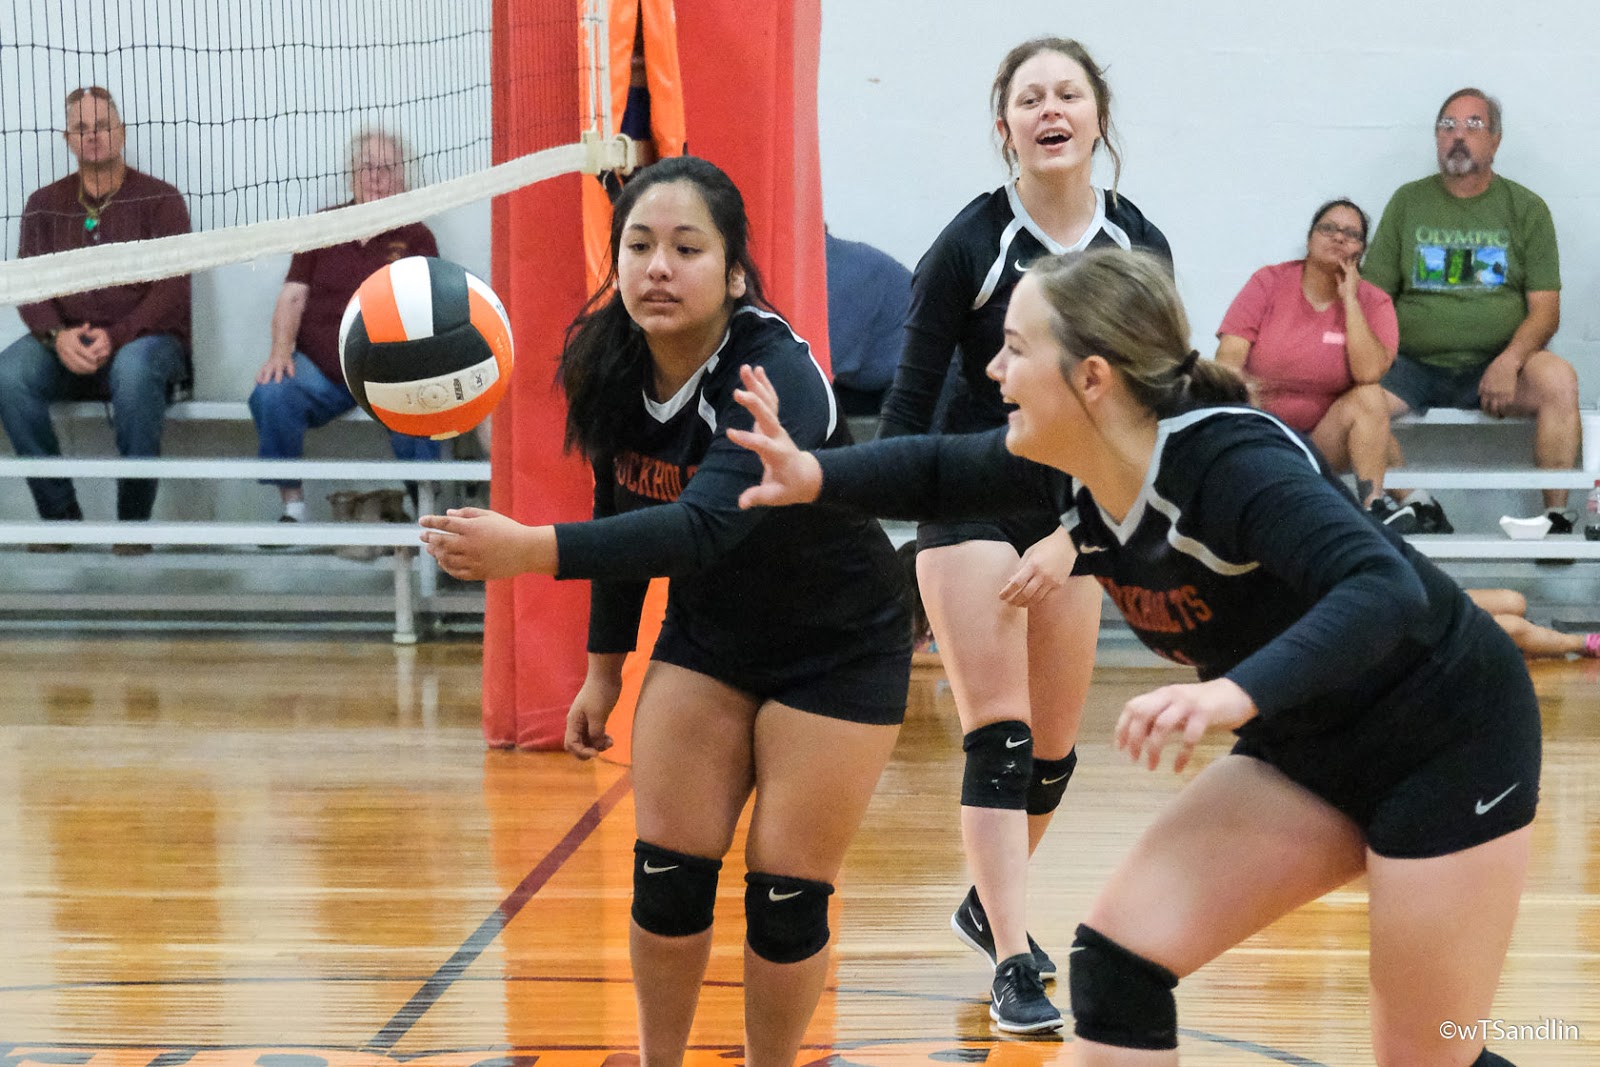 Buckholts Info: Buckholts Falls To Milano In Volleyball